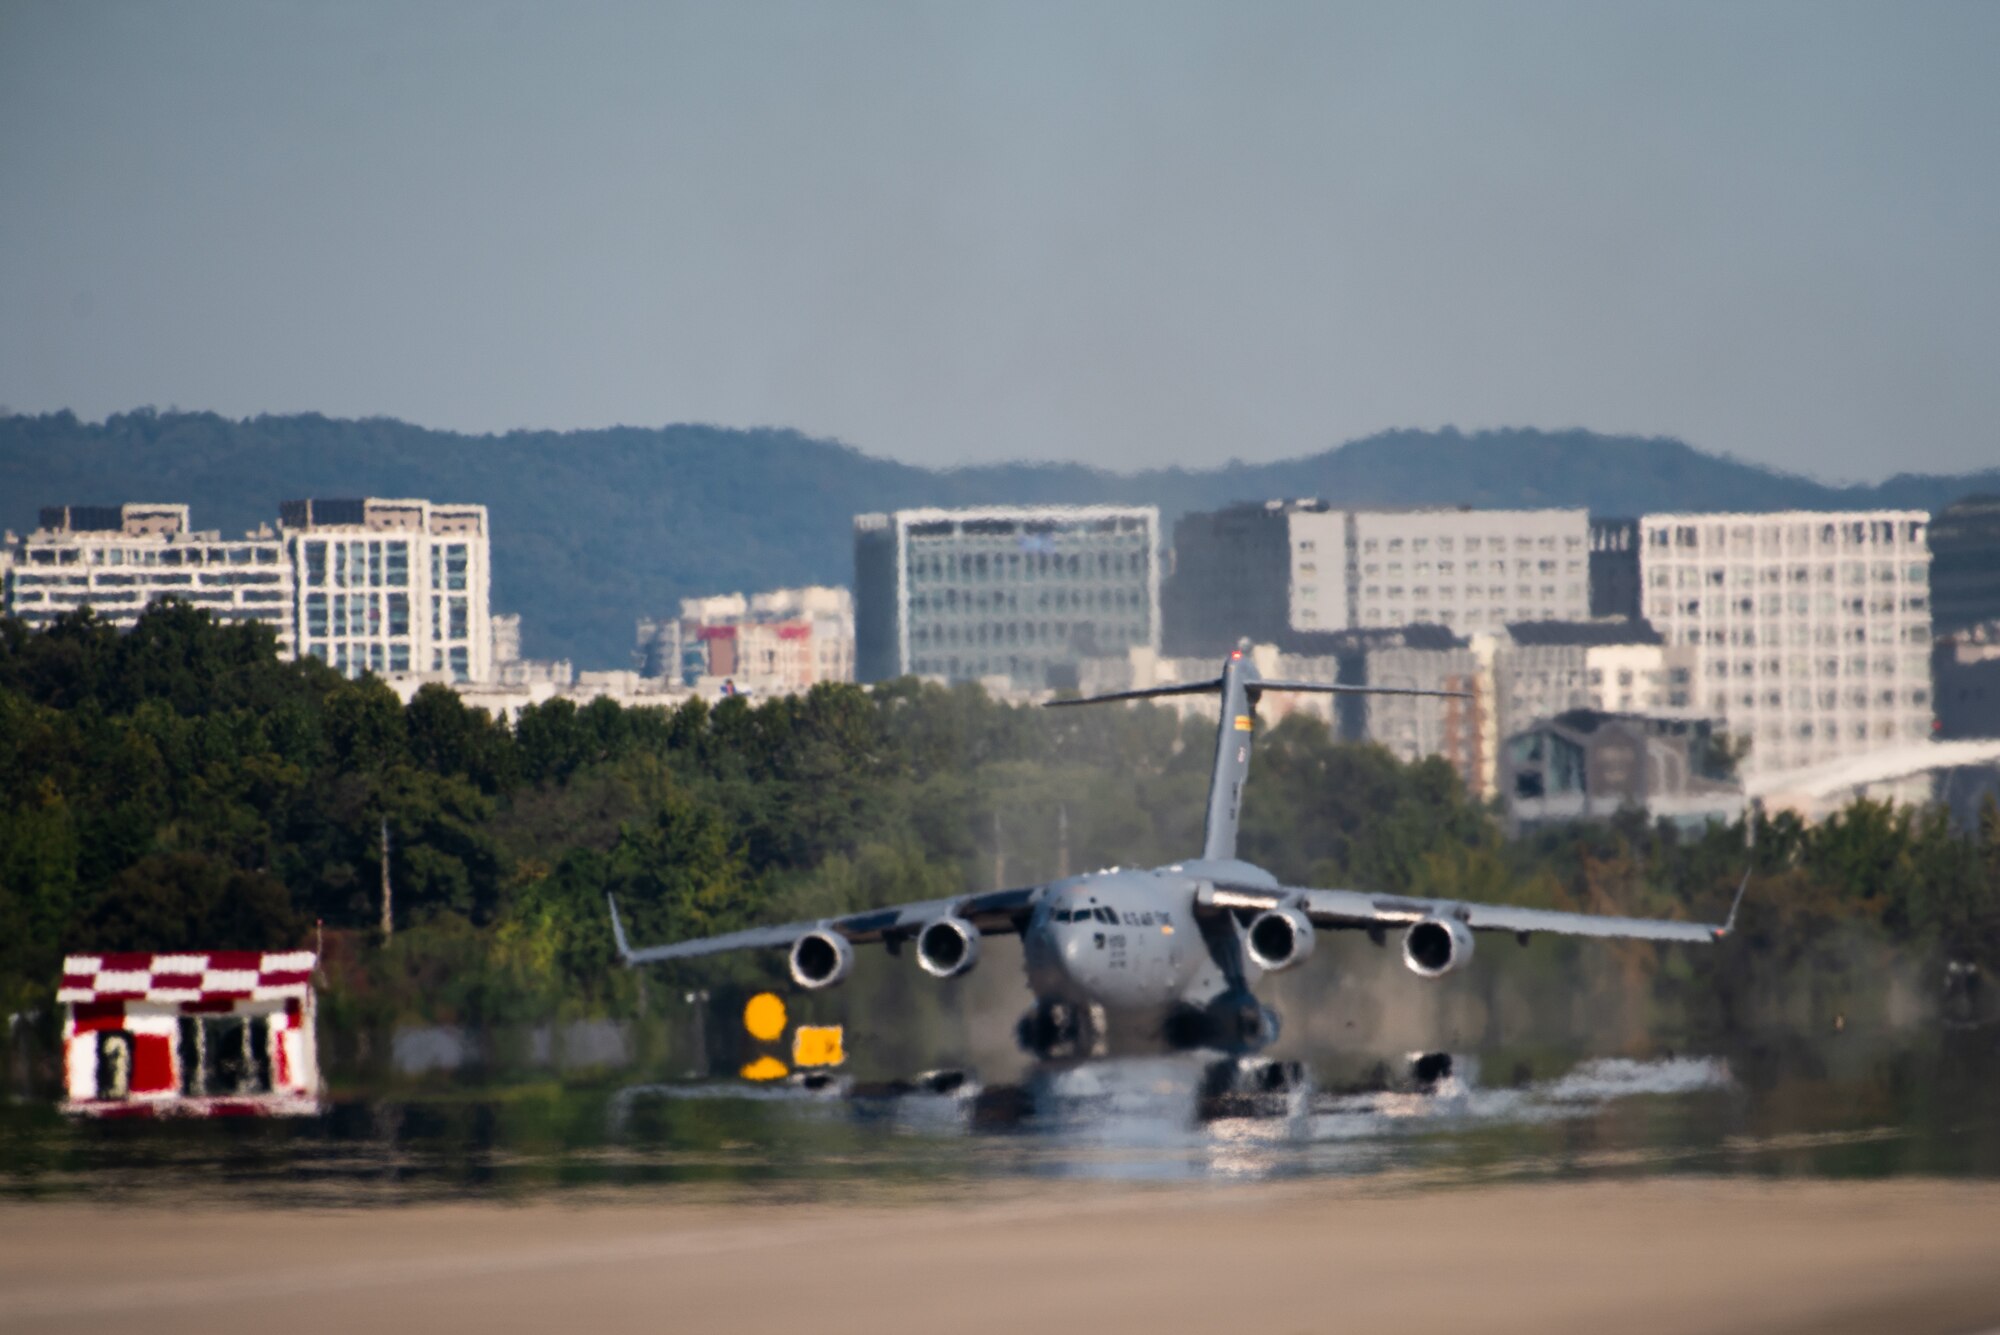 A C-17 Globemaster III begins takeoff at Seoul Air Base, Republic of Korea, Oct. 17, 2021. The aircraft was performing a demonstration for the Seoul International Aerospace and Defense Exhibition, also known as Seoul ADEX 21. Seoul ADEX 21 is the largest, most comprehensive event of its kind in Northeast Asia, attracting aviation and aerospace professionals, key defense personnel, aviation enthusiasts and the general public alike. Seoul ADEX 21 offers a venue to deepen the U.S. relationship with the ROK and enhance regional security though expanded military-to-military cooperation and with regional partners and allies.